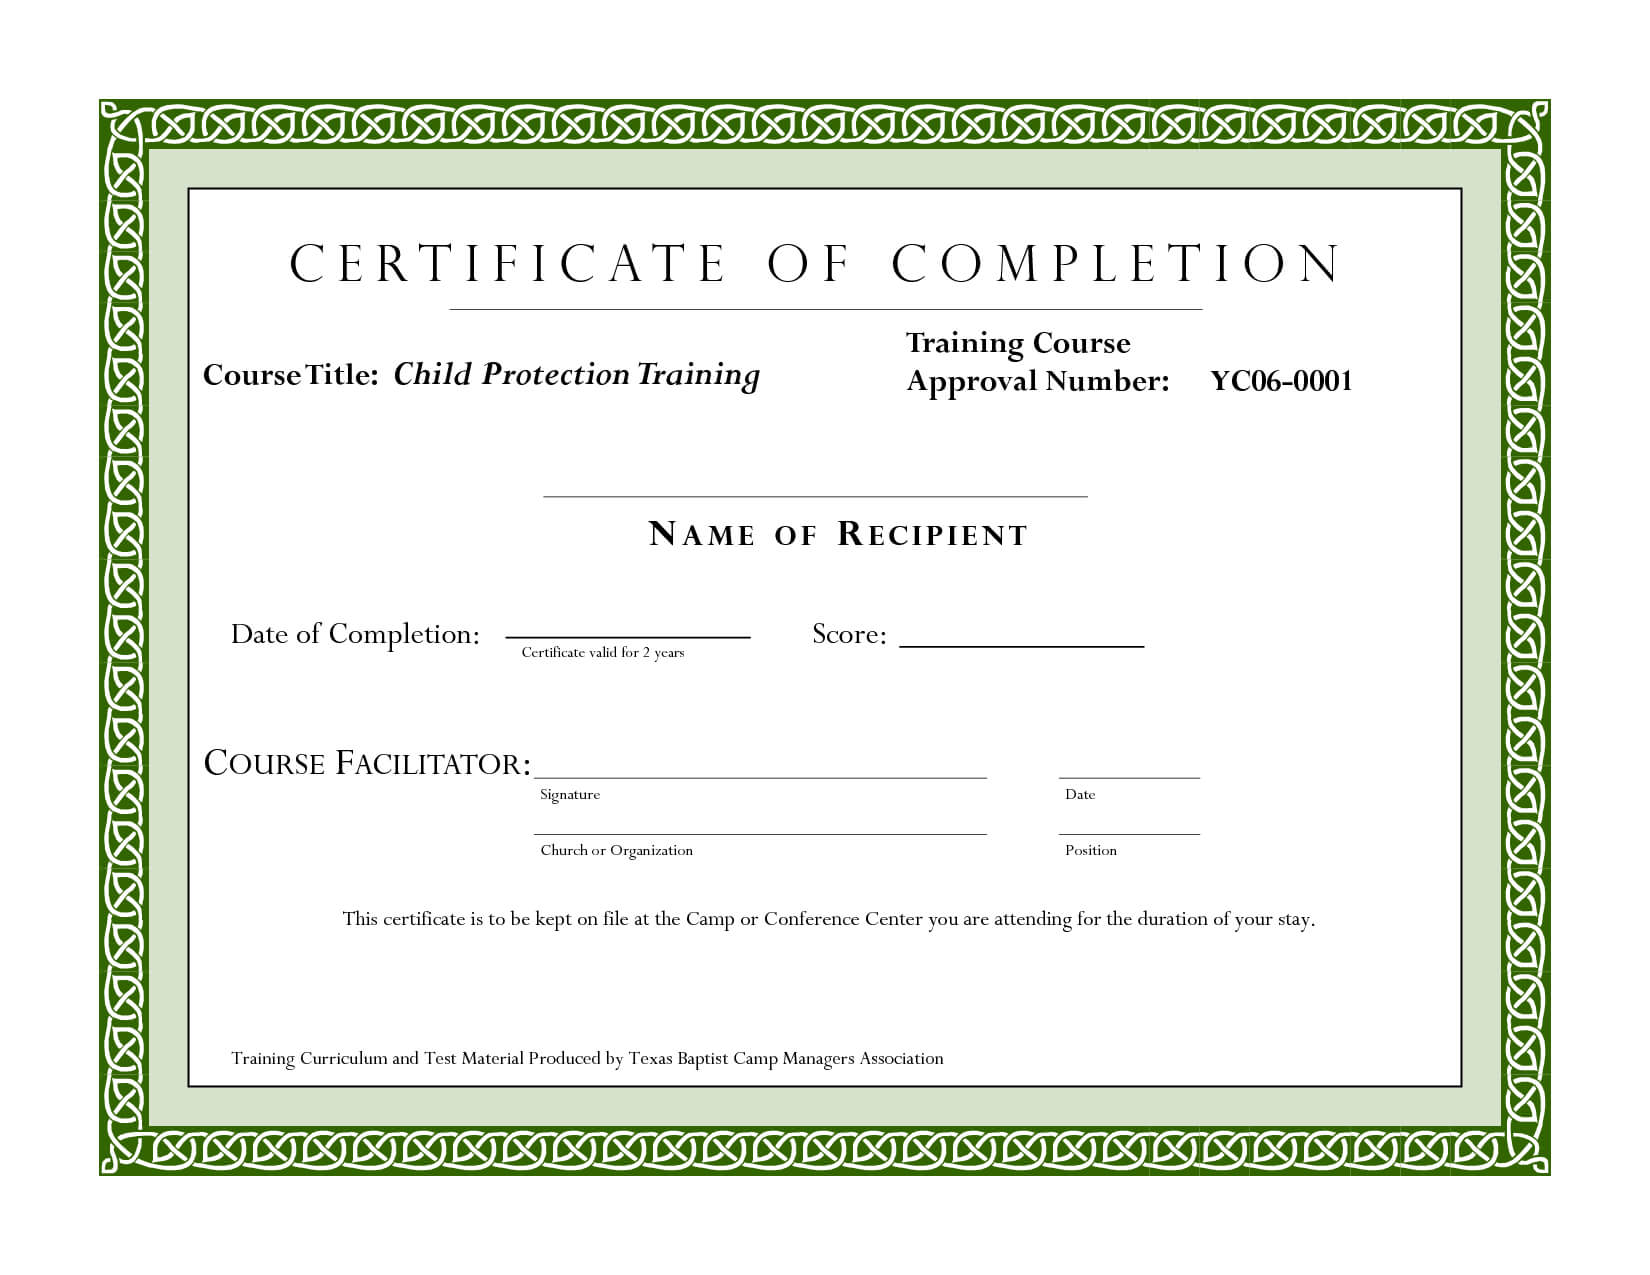 Course Completion Certificate Template | Certificate Of Regarding Certificate Template For Project Completion